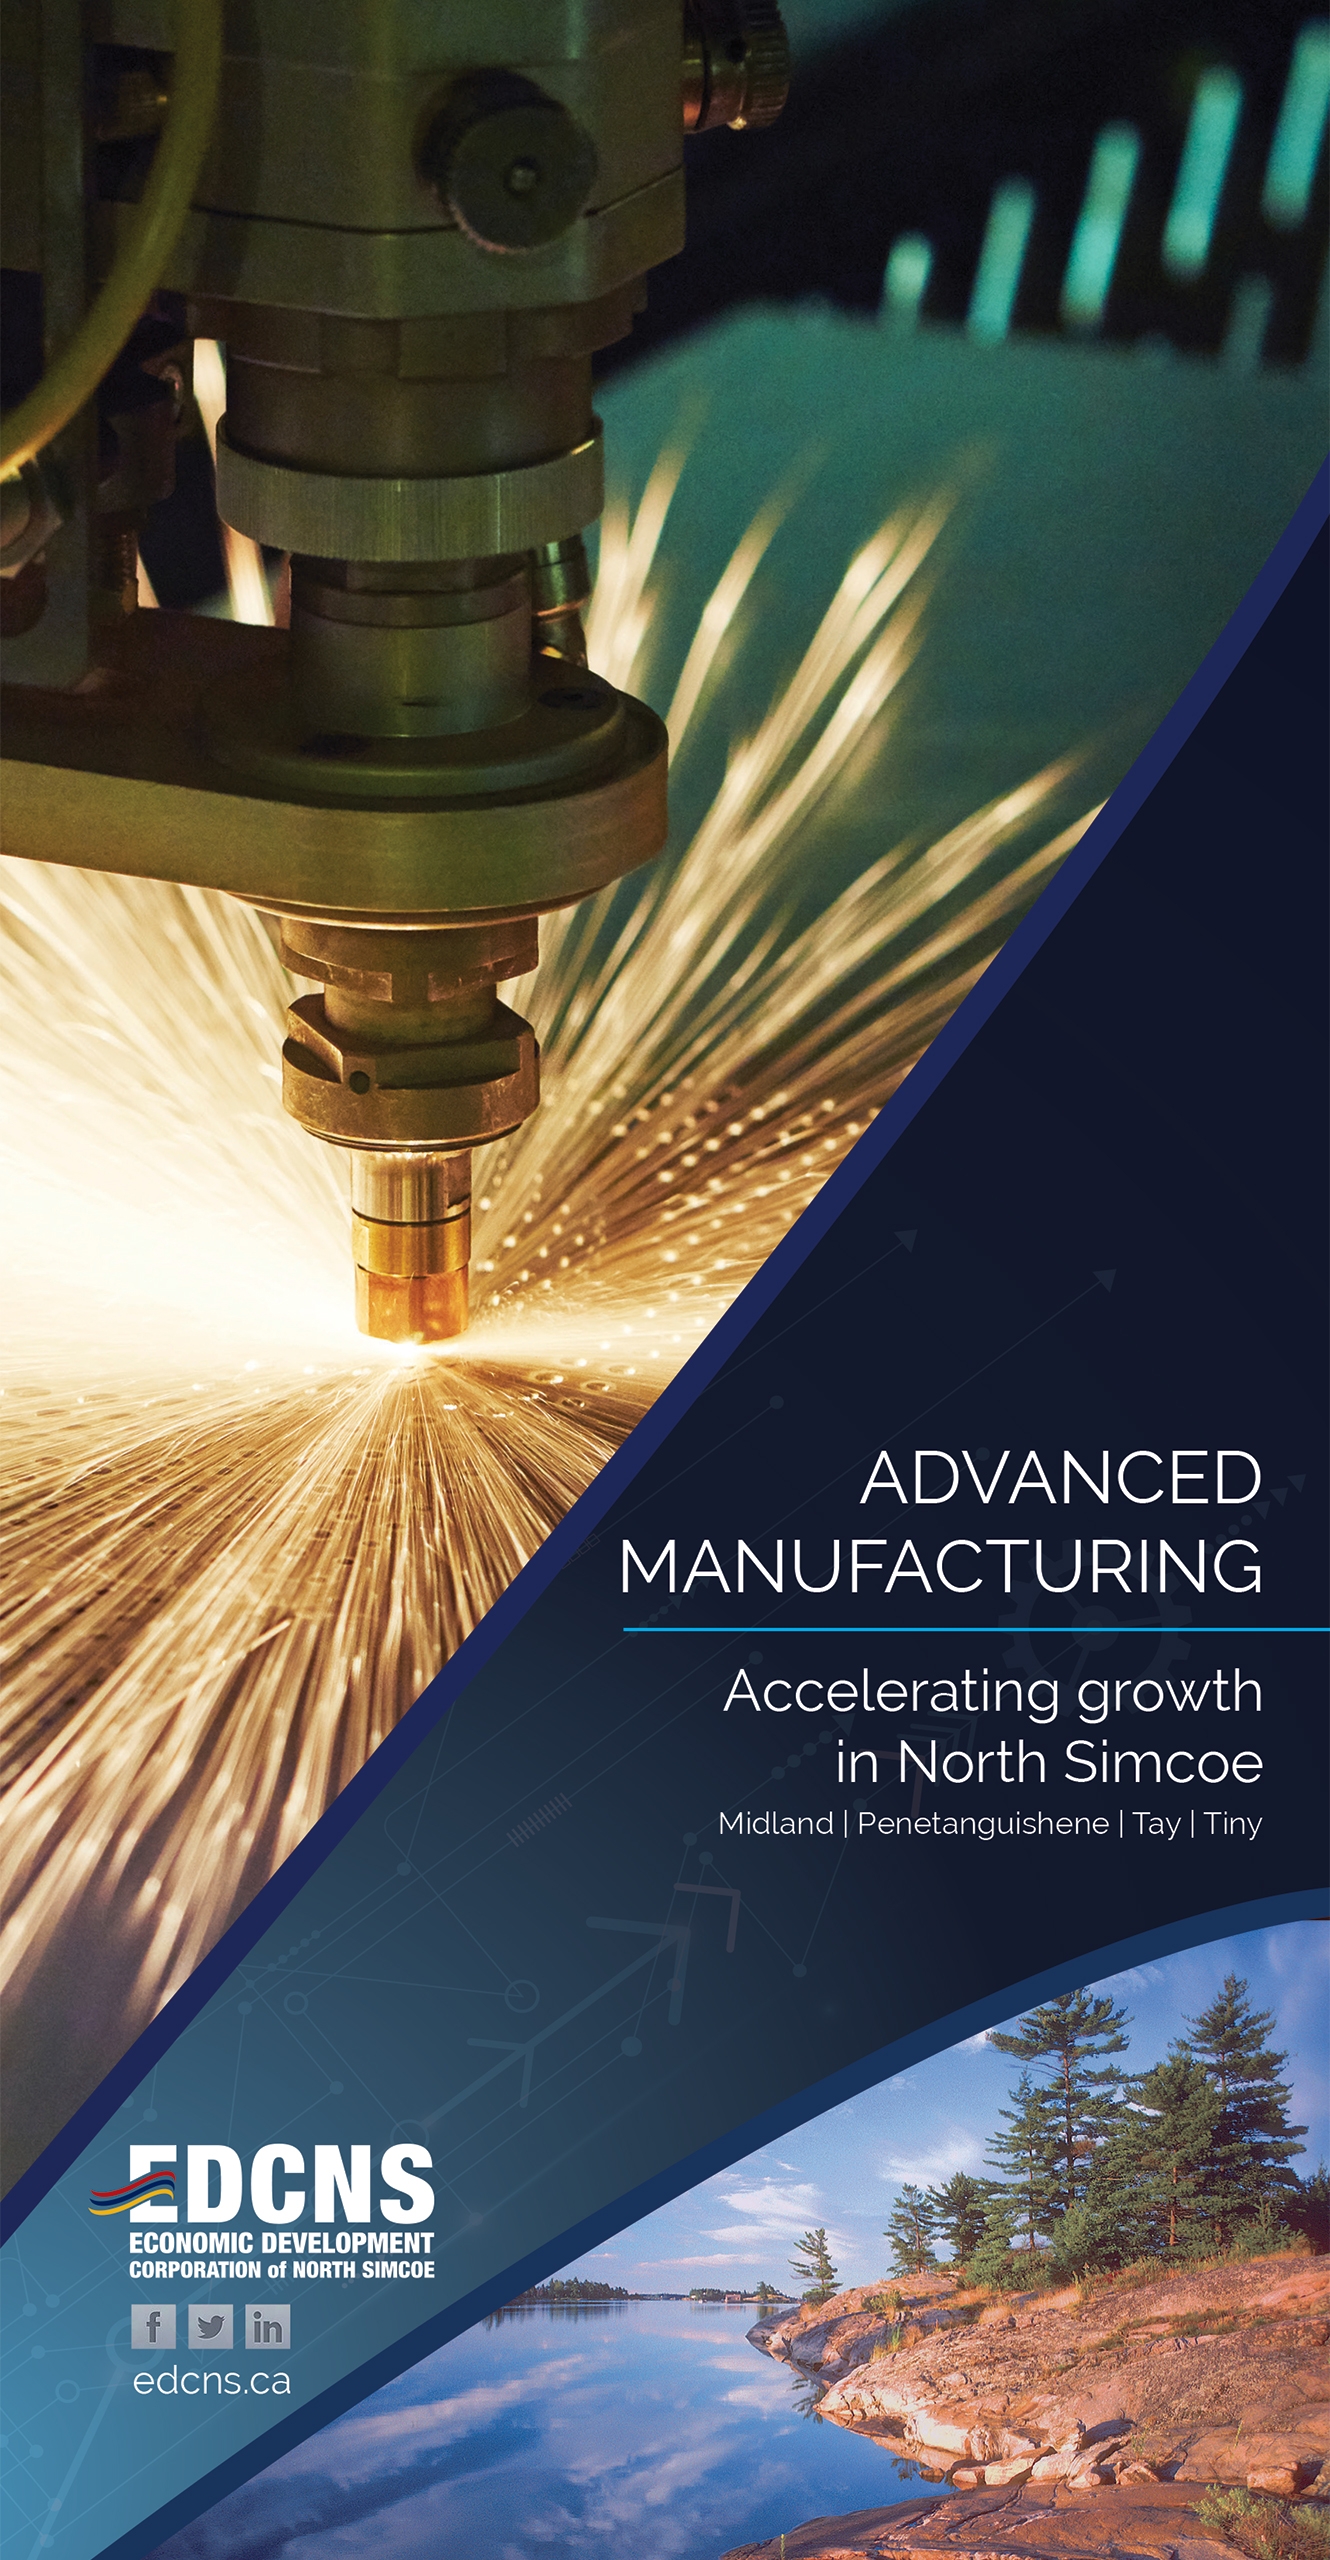 Advanced Manufacturing in North Simcoe Brochure